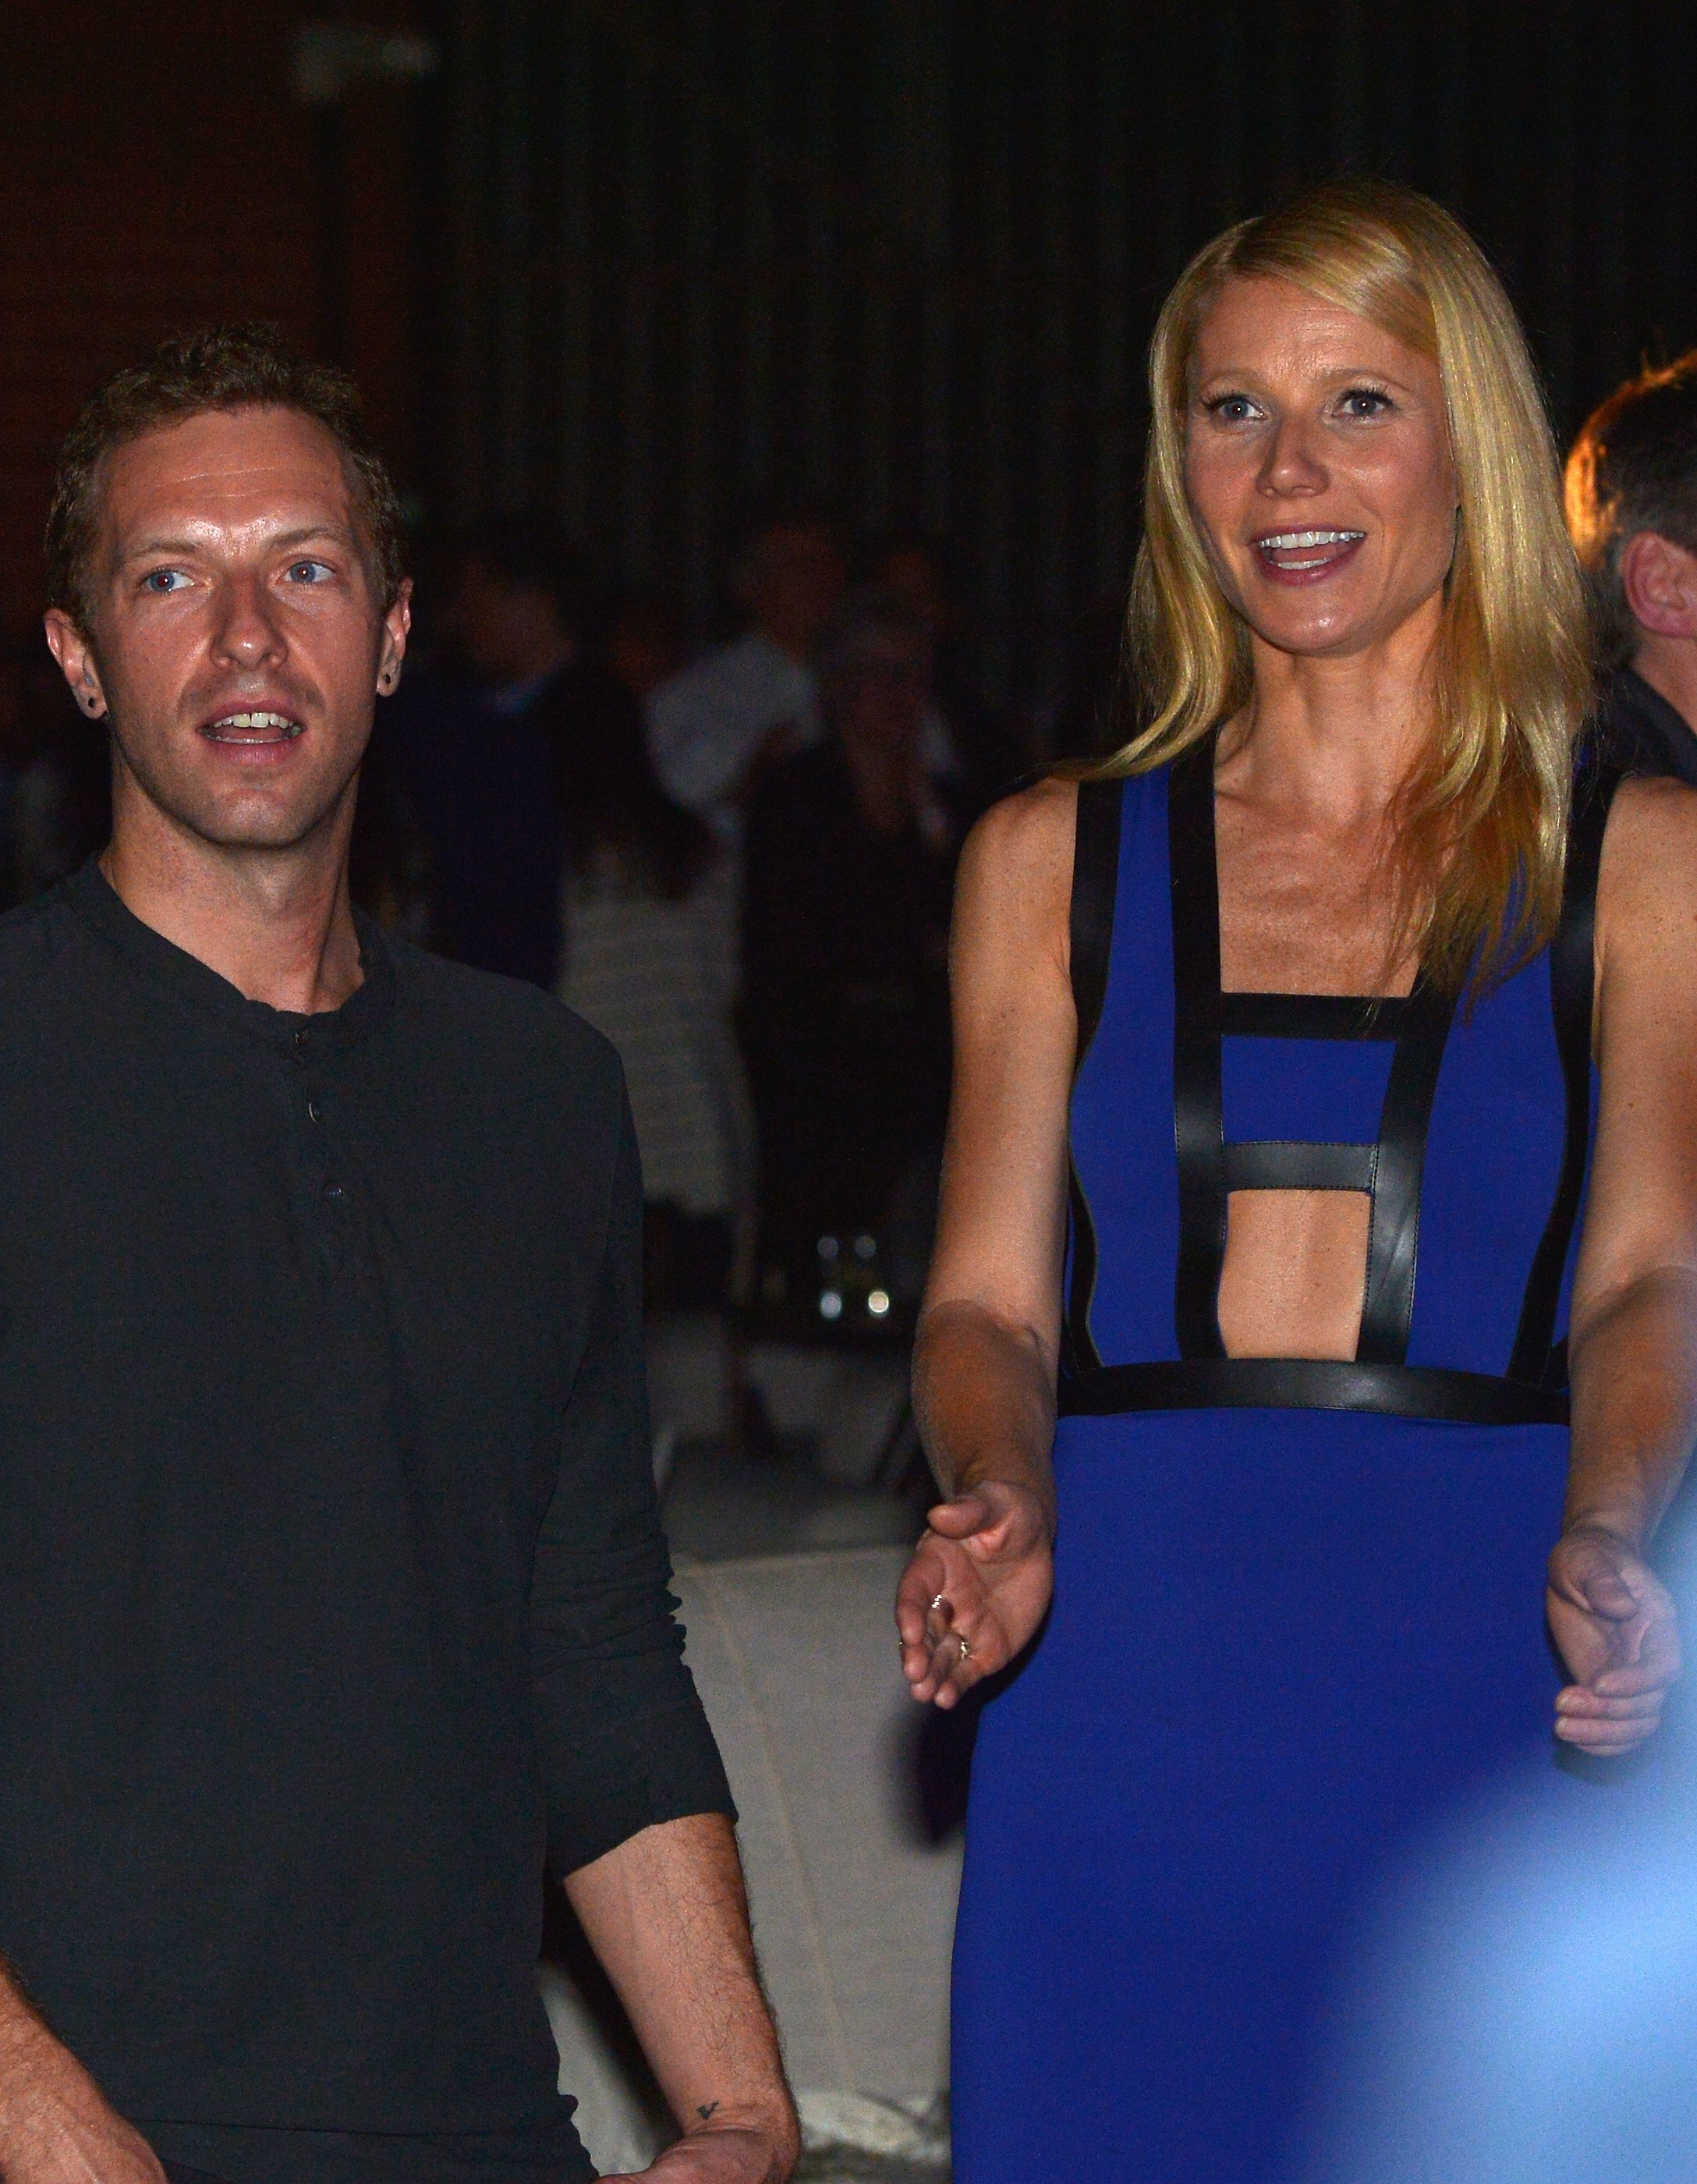 Chris Martin and Gwyneth Paltrow attend Hollywood Stands Up To Cancer Event with contributors American Cancer Society and Bristol Myers Squibb hosted by Jim Toth and Reese Witherspoon and the Entertainment Industry Foundation on Tuesday, January 28, 2014 in Culver City, California | Source: Getty Images 